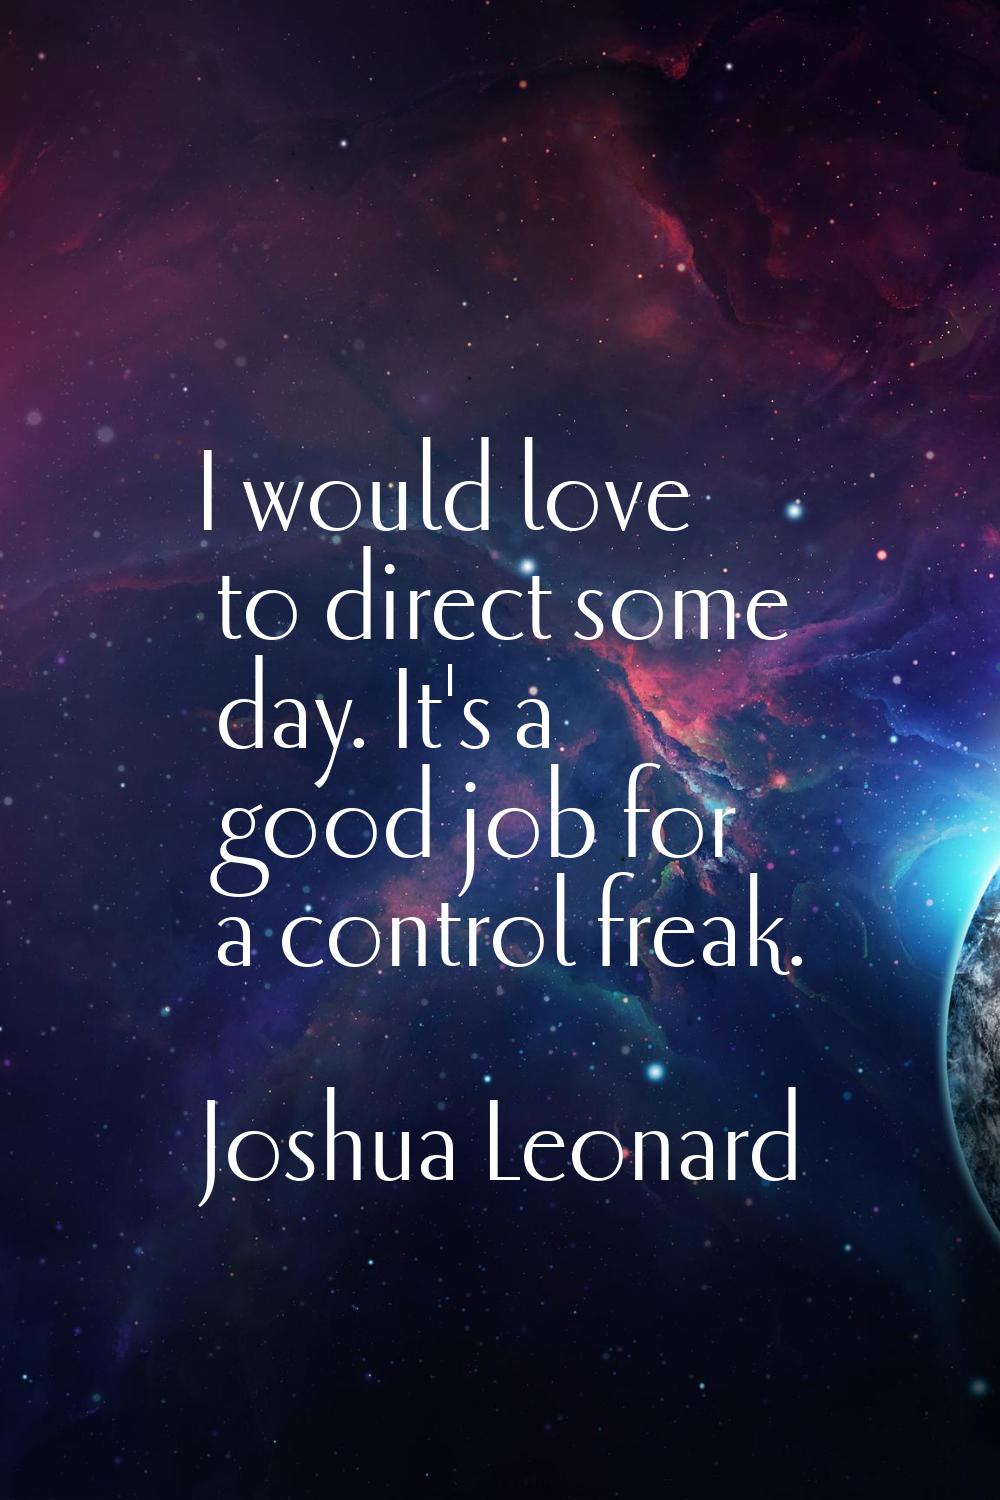 I would love to direct some day. It's a good job for a control freak.